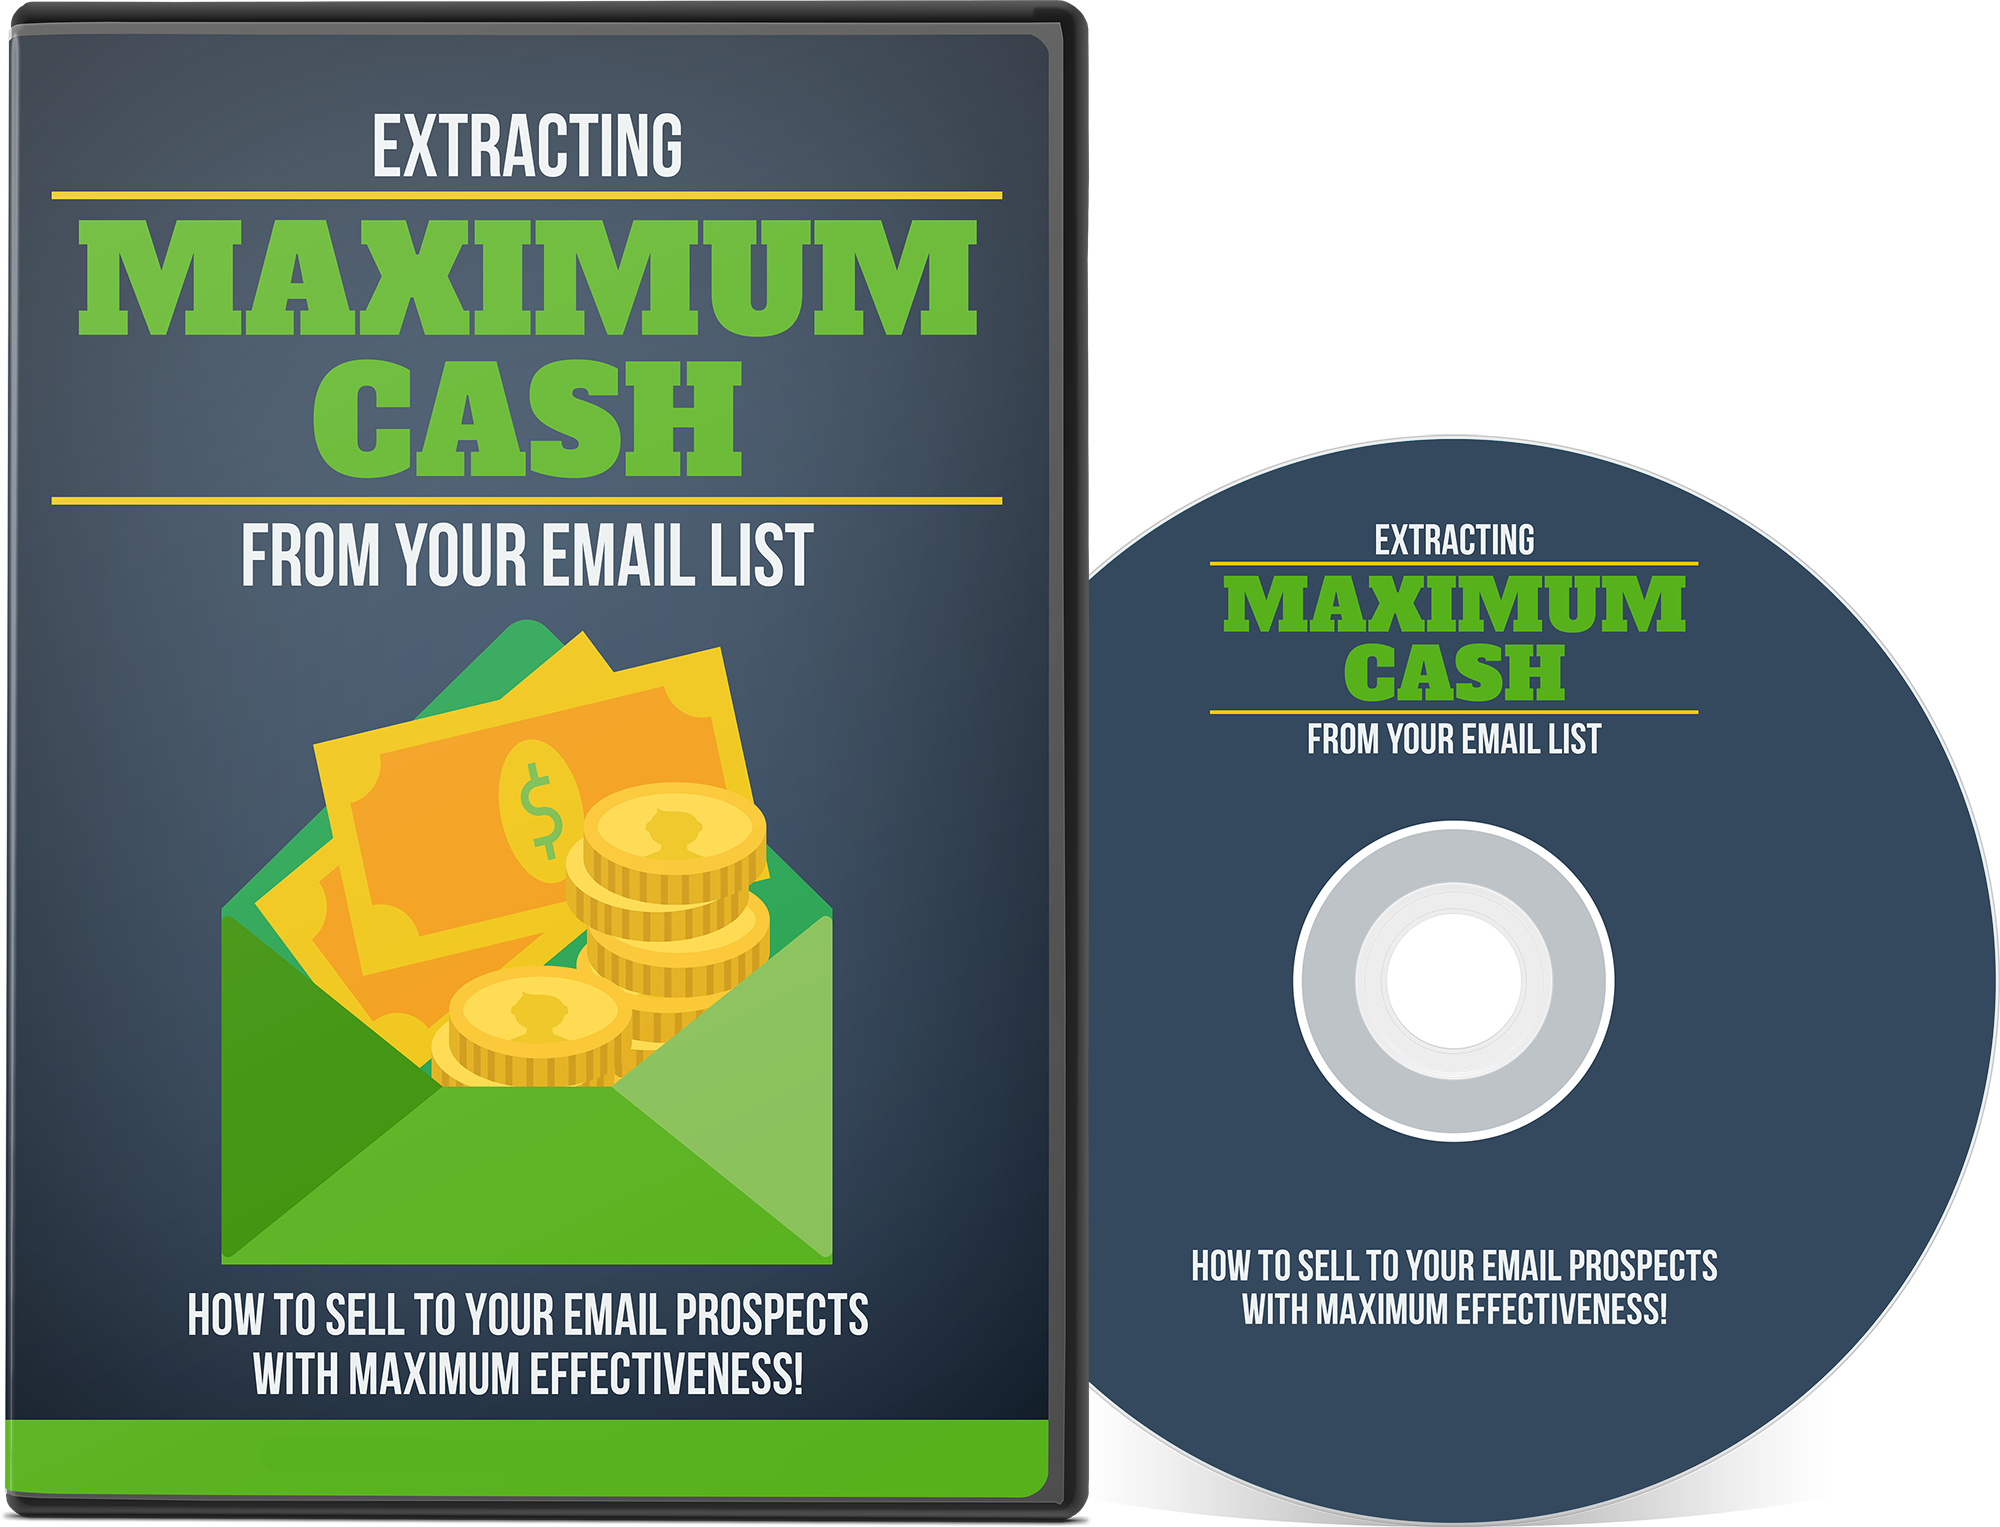 Extracting Maximum Cash From Your Email List